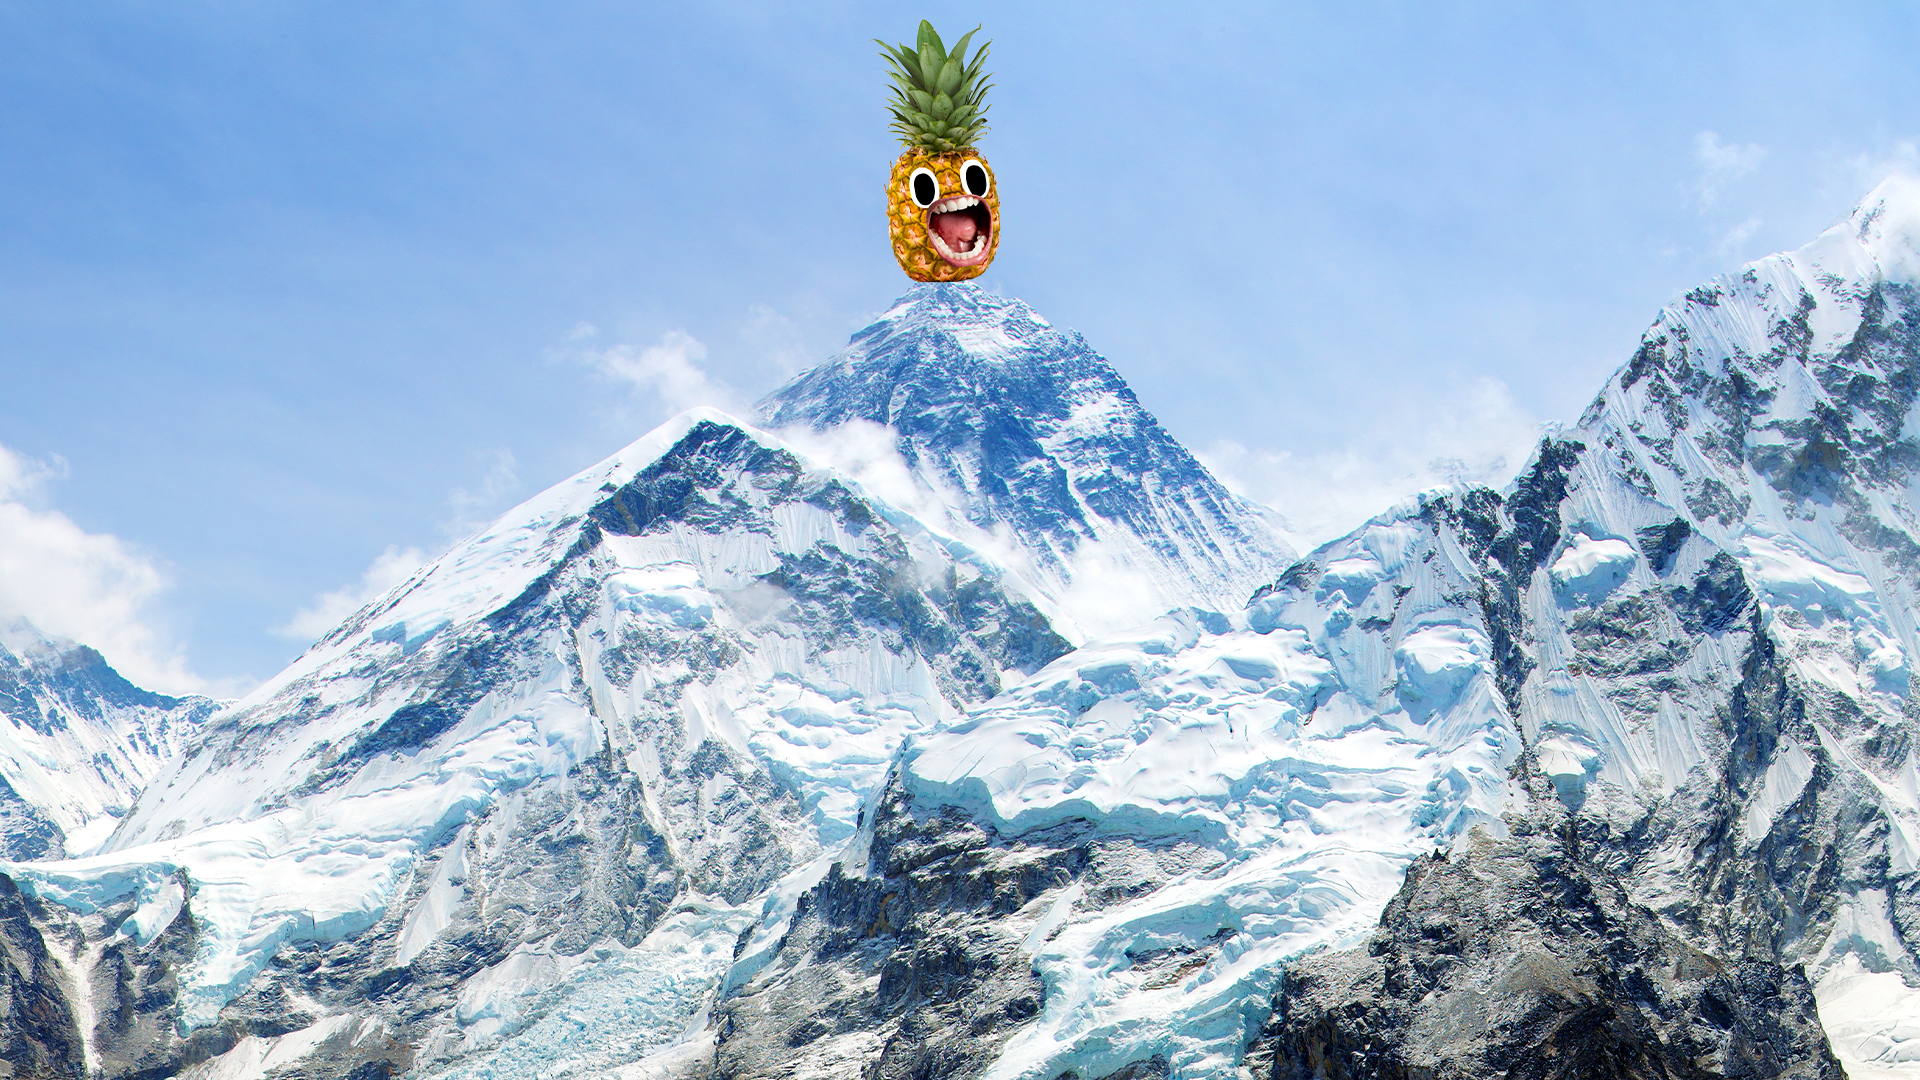 Mountains and screaming pineapple